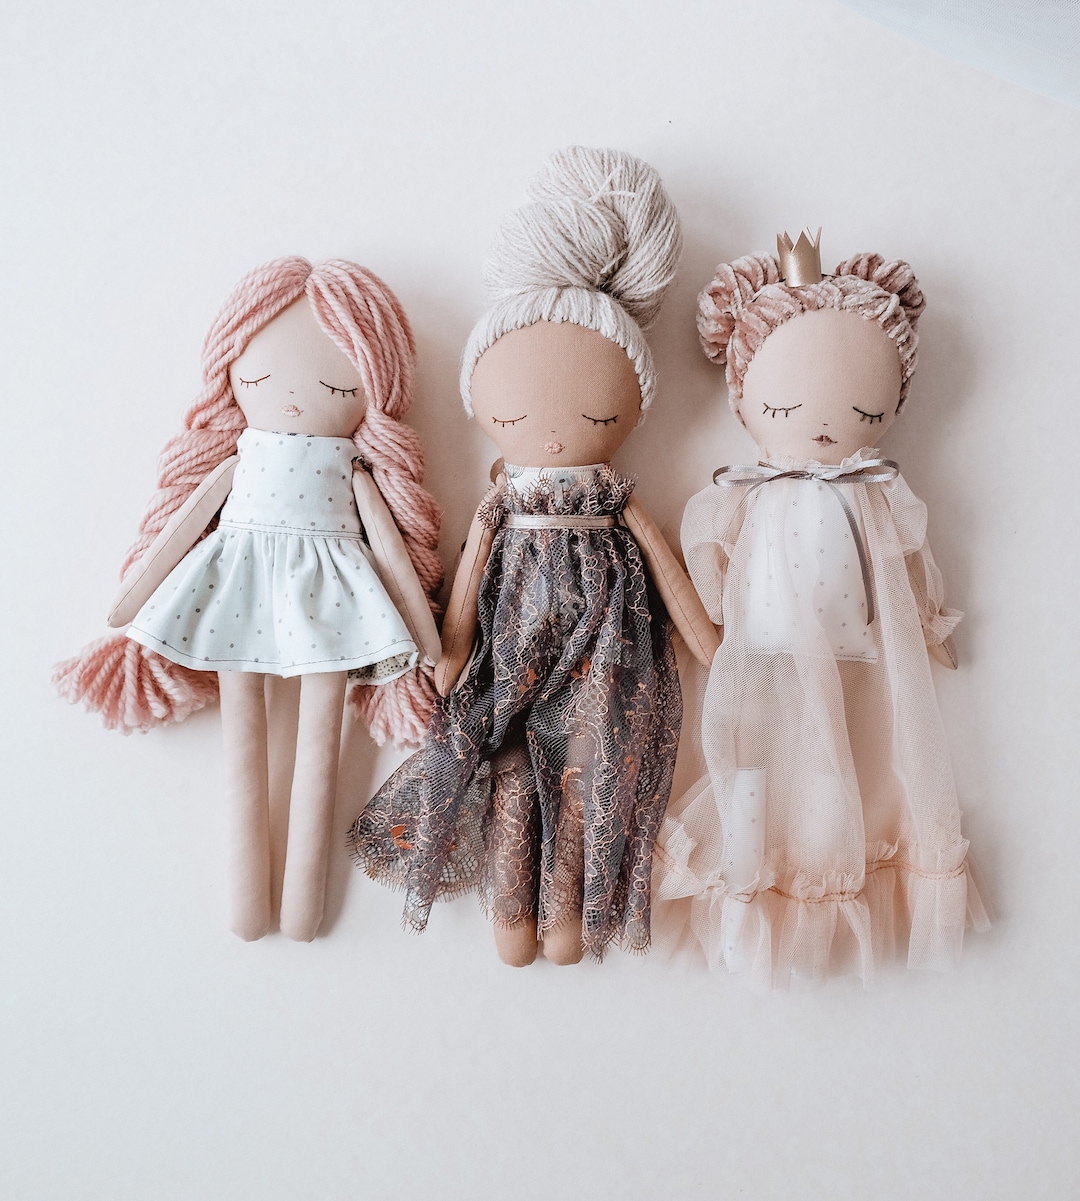 Princess Doll Sewing Pattern With 3 Hairstyles, 3 Dresses, 4 Face Templates  detailed Instructions in English 